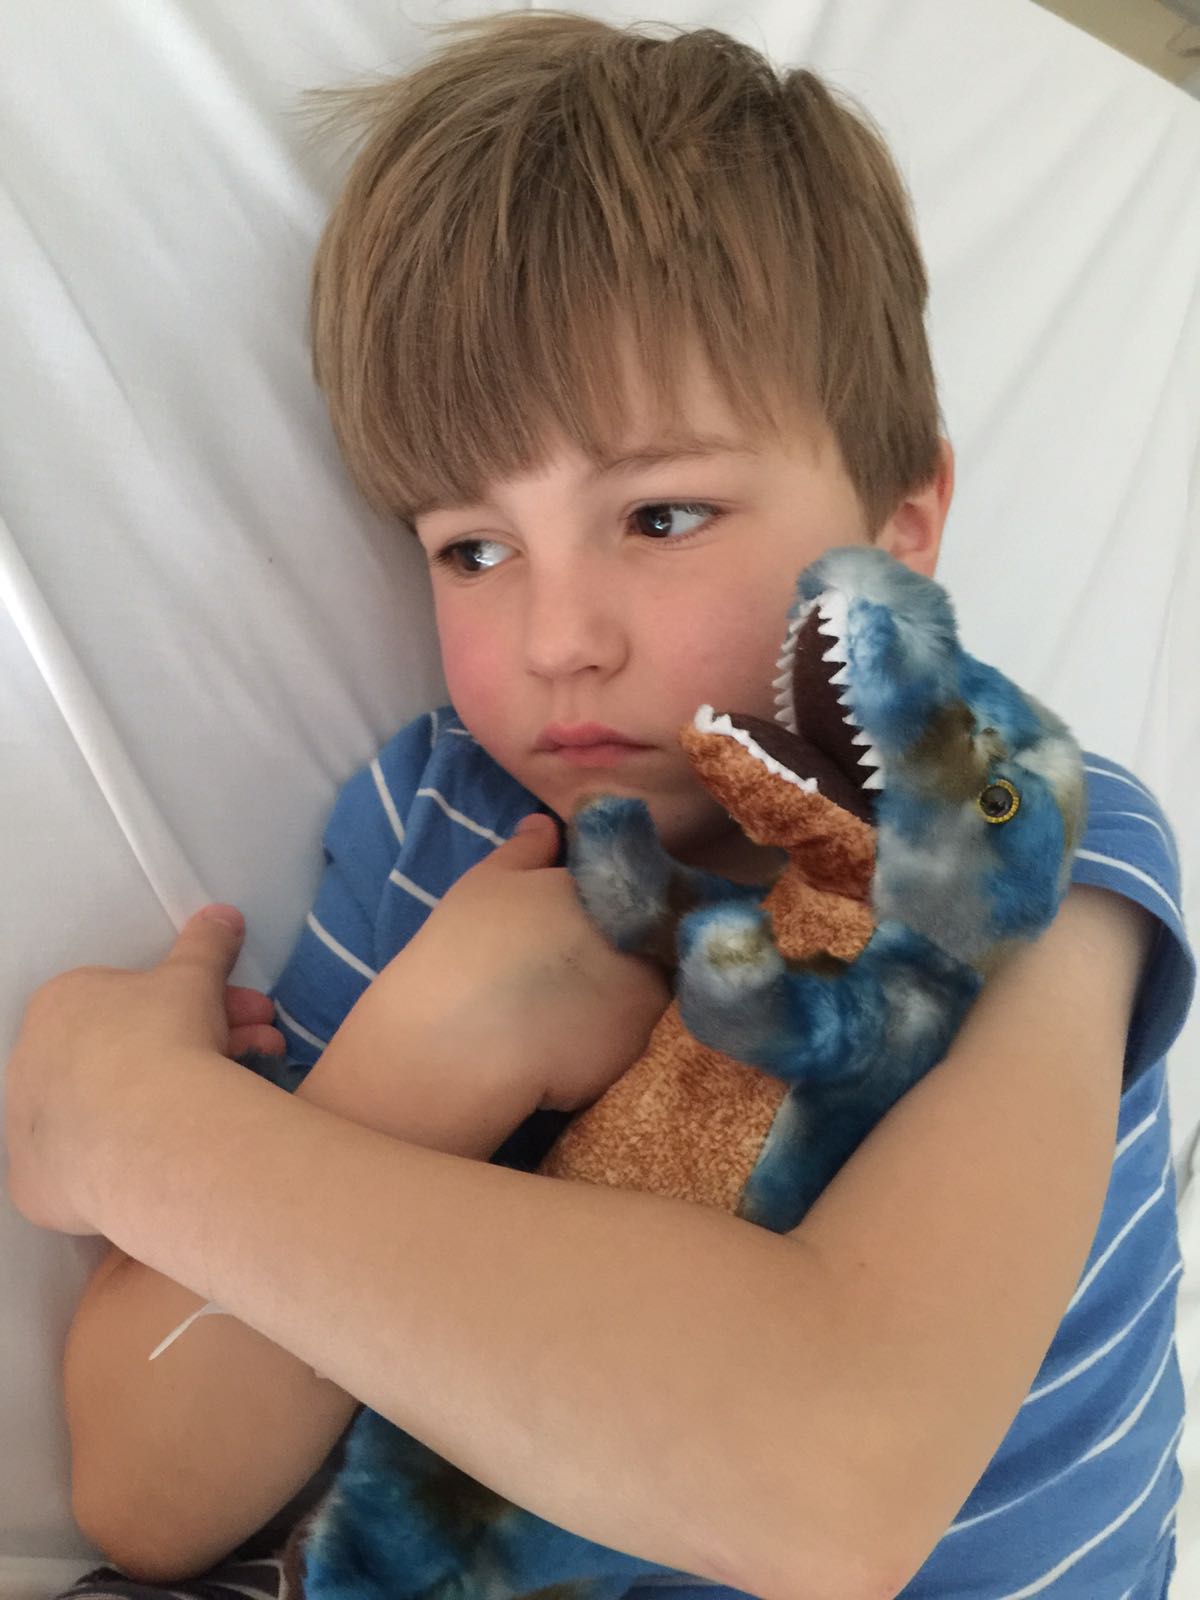 Josh feeling poorly, with his favourite dinosaur toy